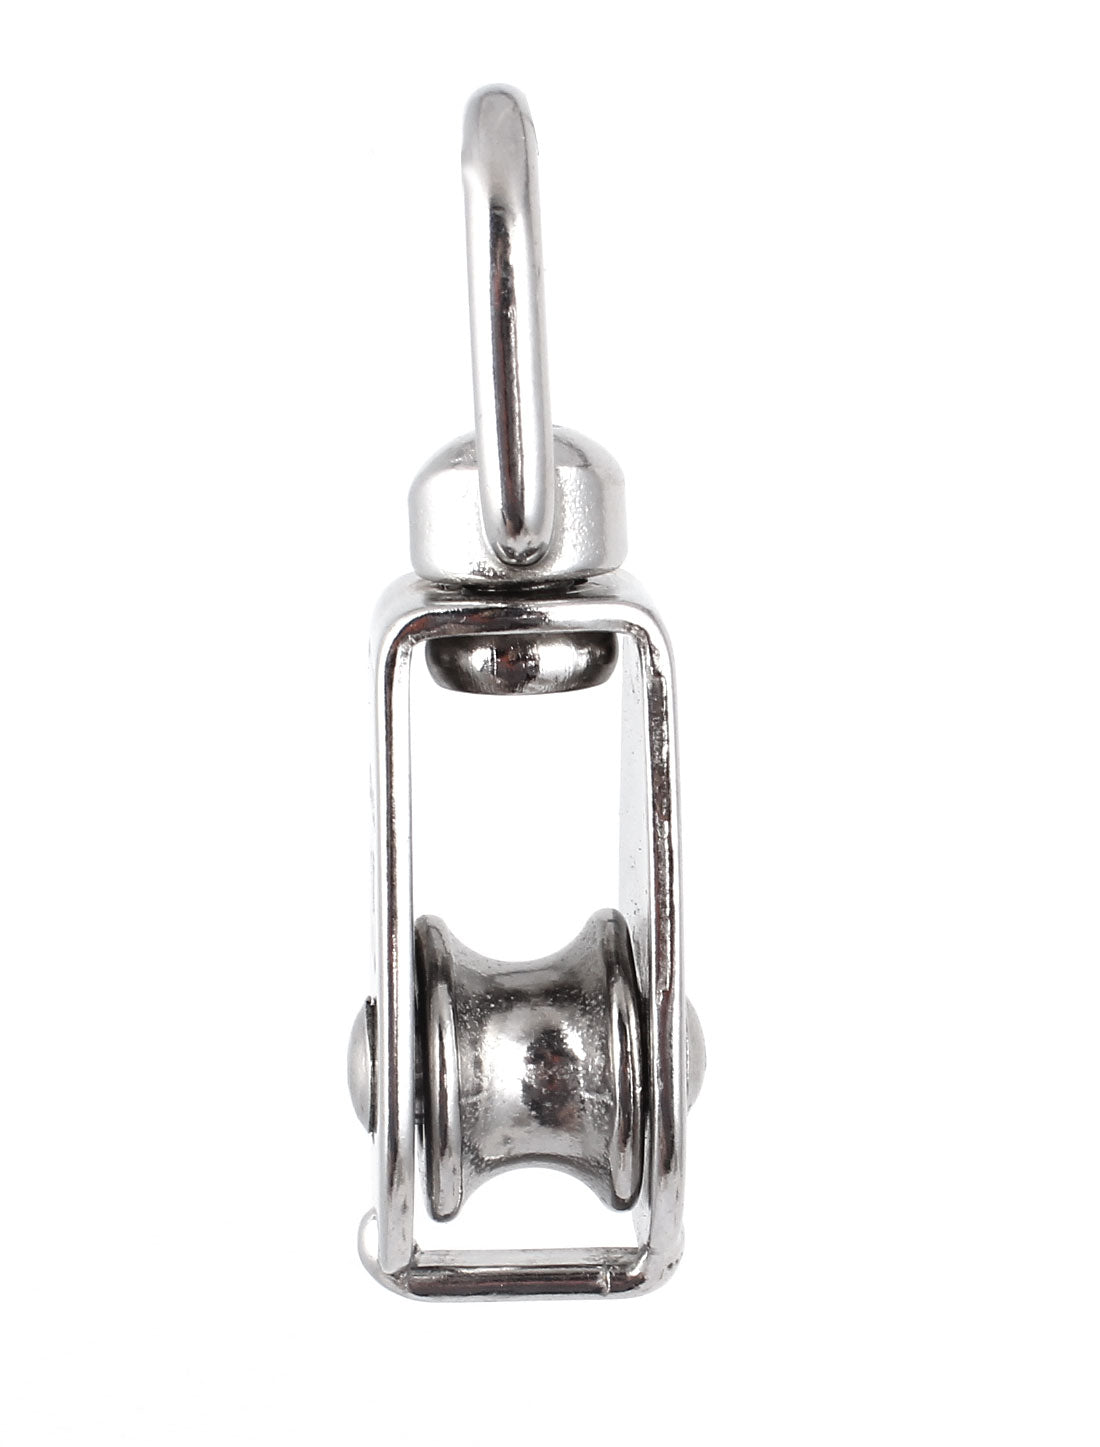 uxcell Uxcell 15mm Diameter Stainless Steel Single Sheave Swivel Eye Rope Pulley